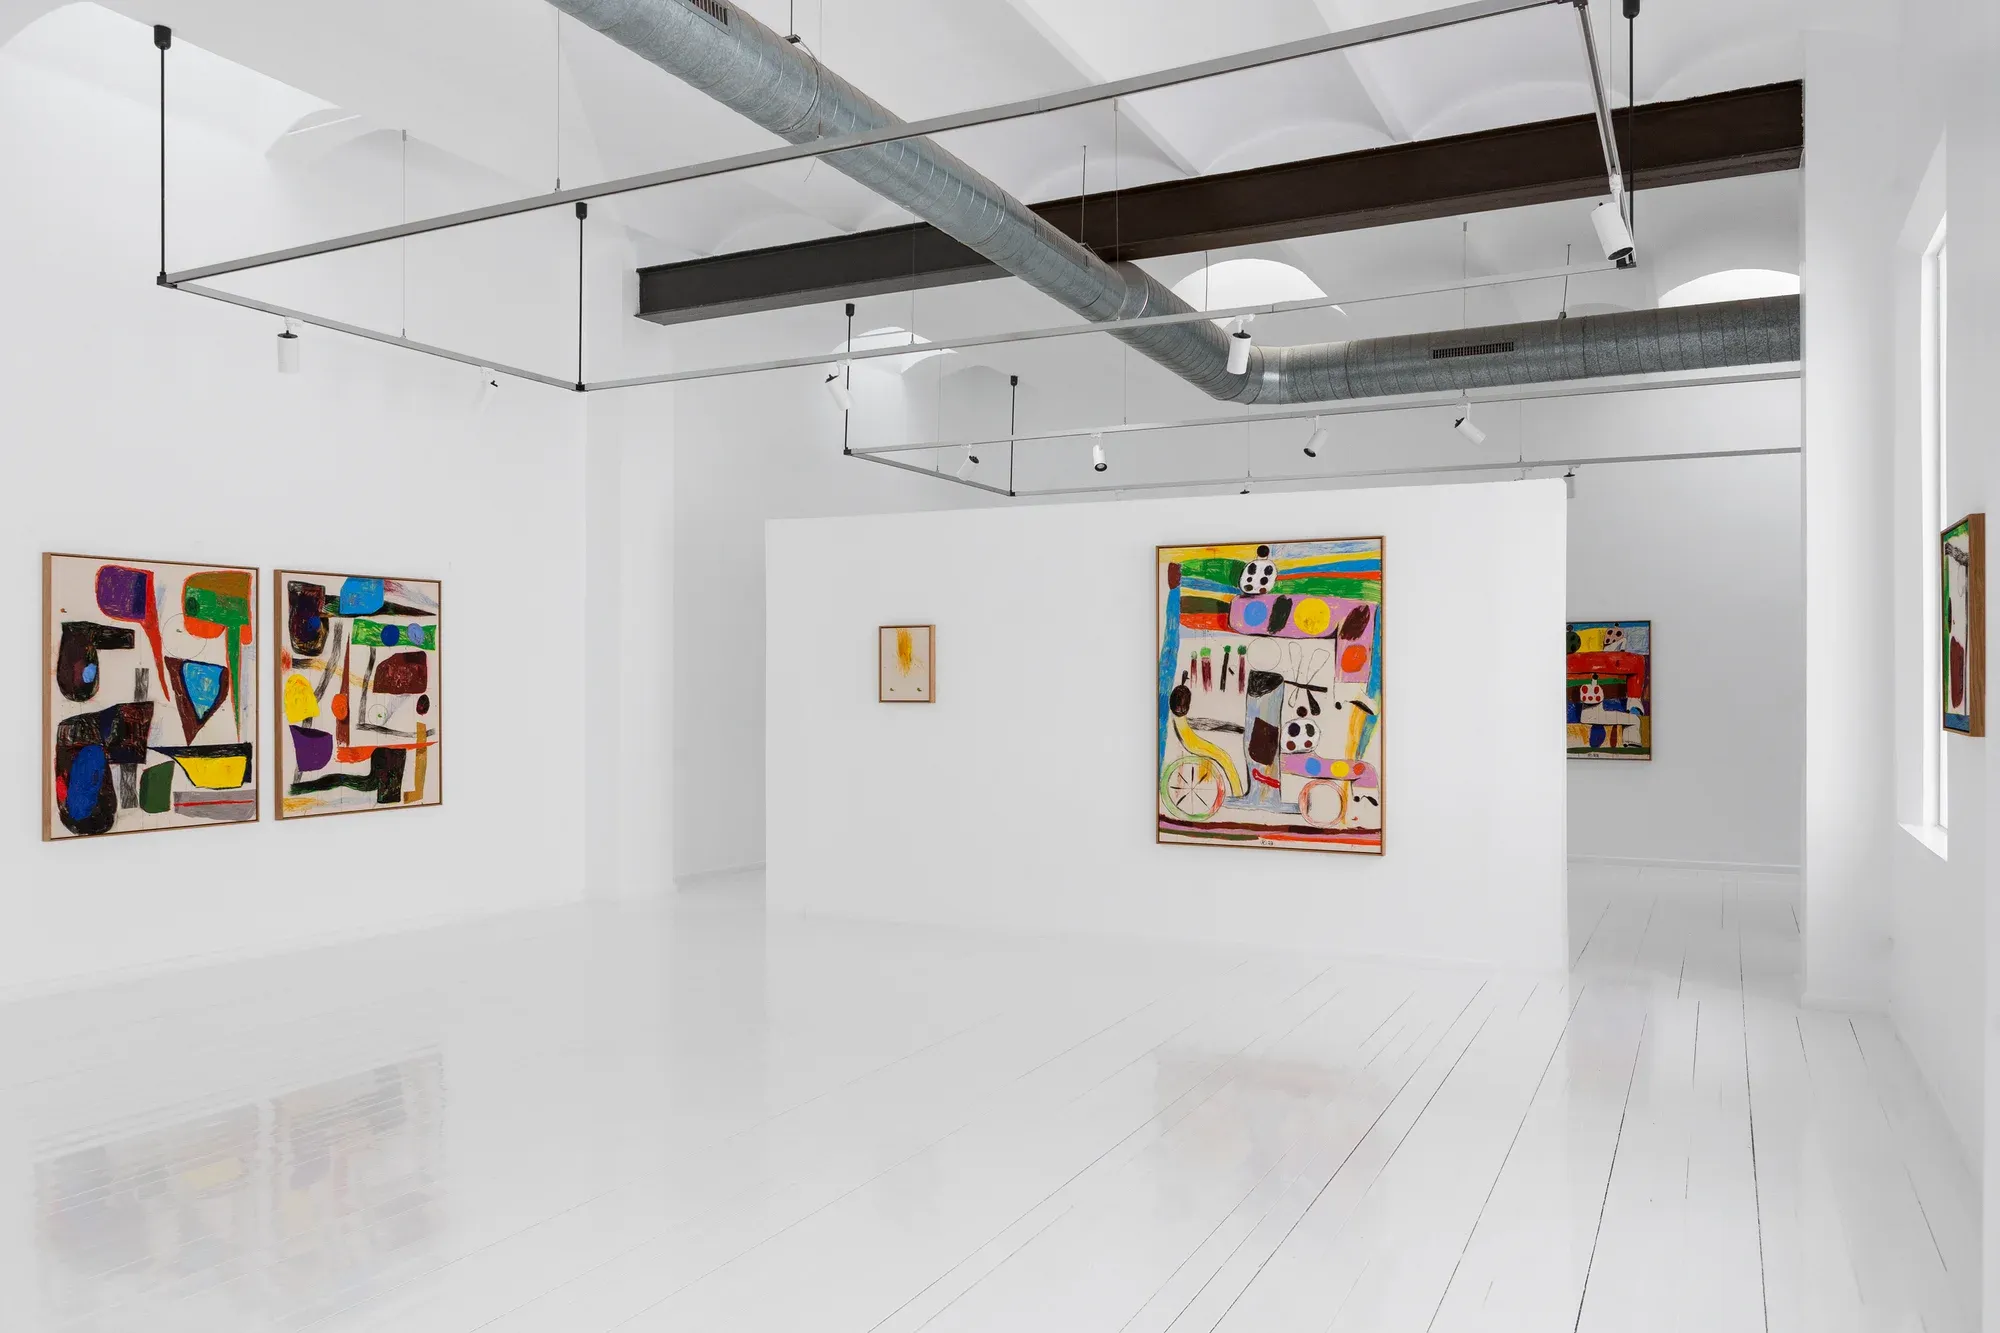 sune christiansen's the leftovers exhibition at alzueta gallery in barcelona, showcasing bold abstract paintings and contemporary art